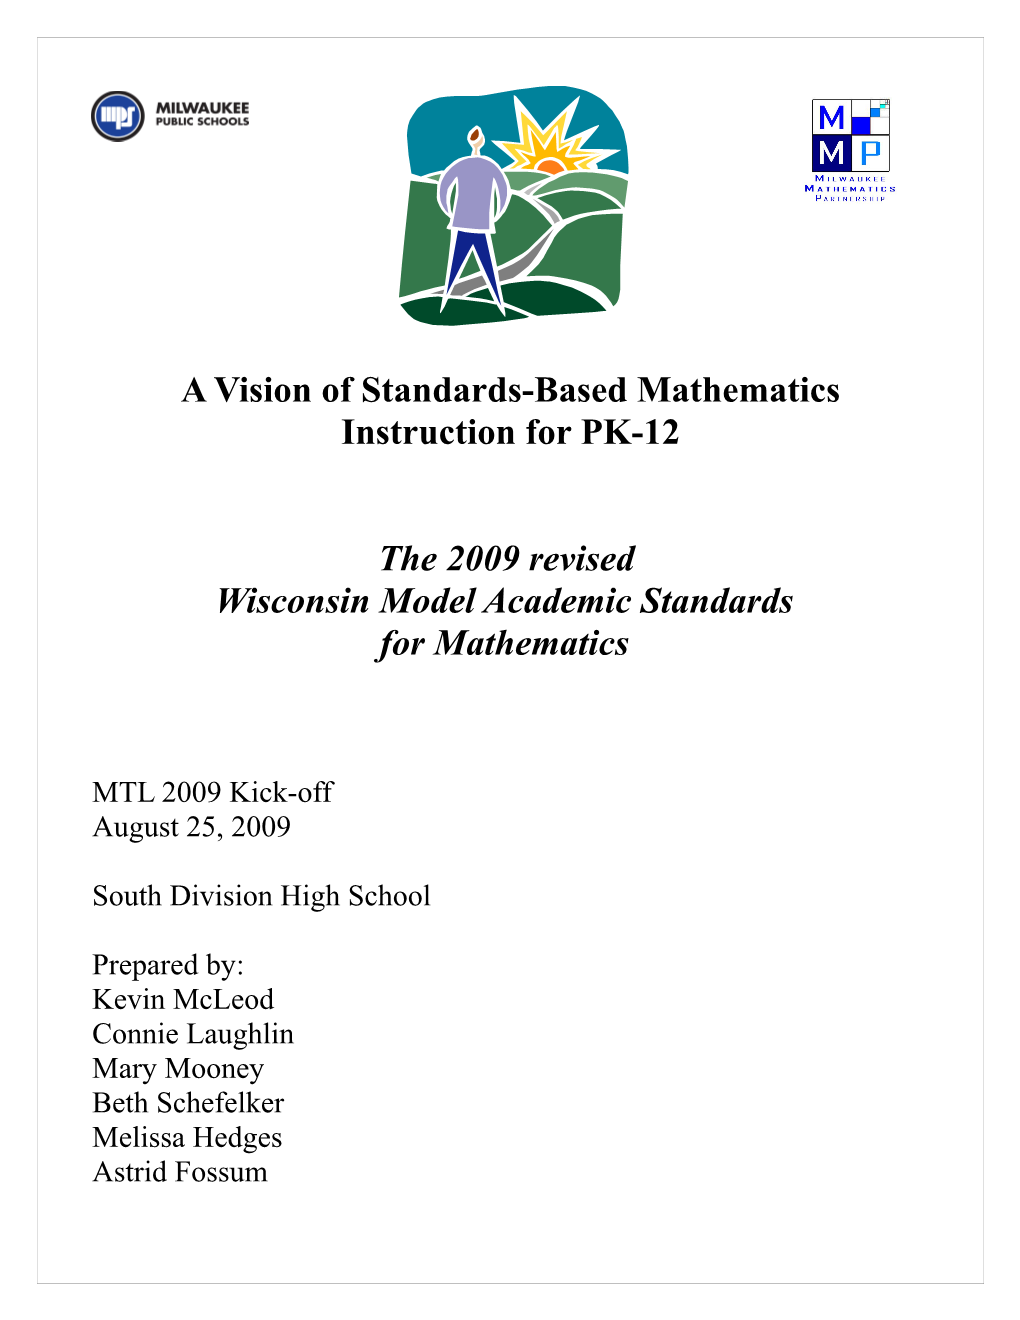 A Vision of Standards-Based Mathematics Instruction for PK-12